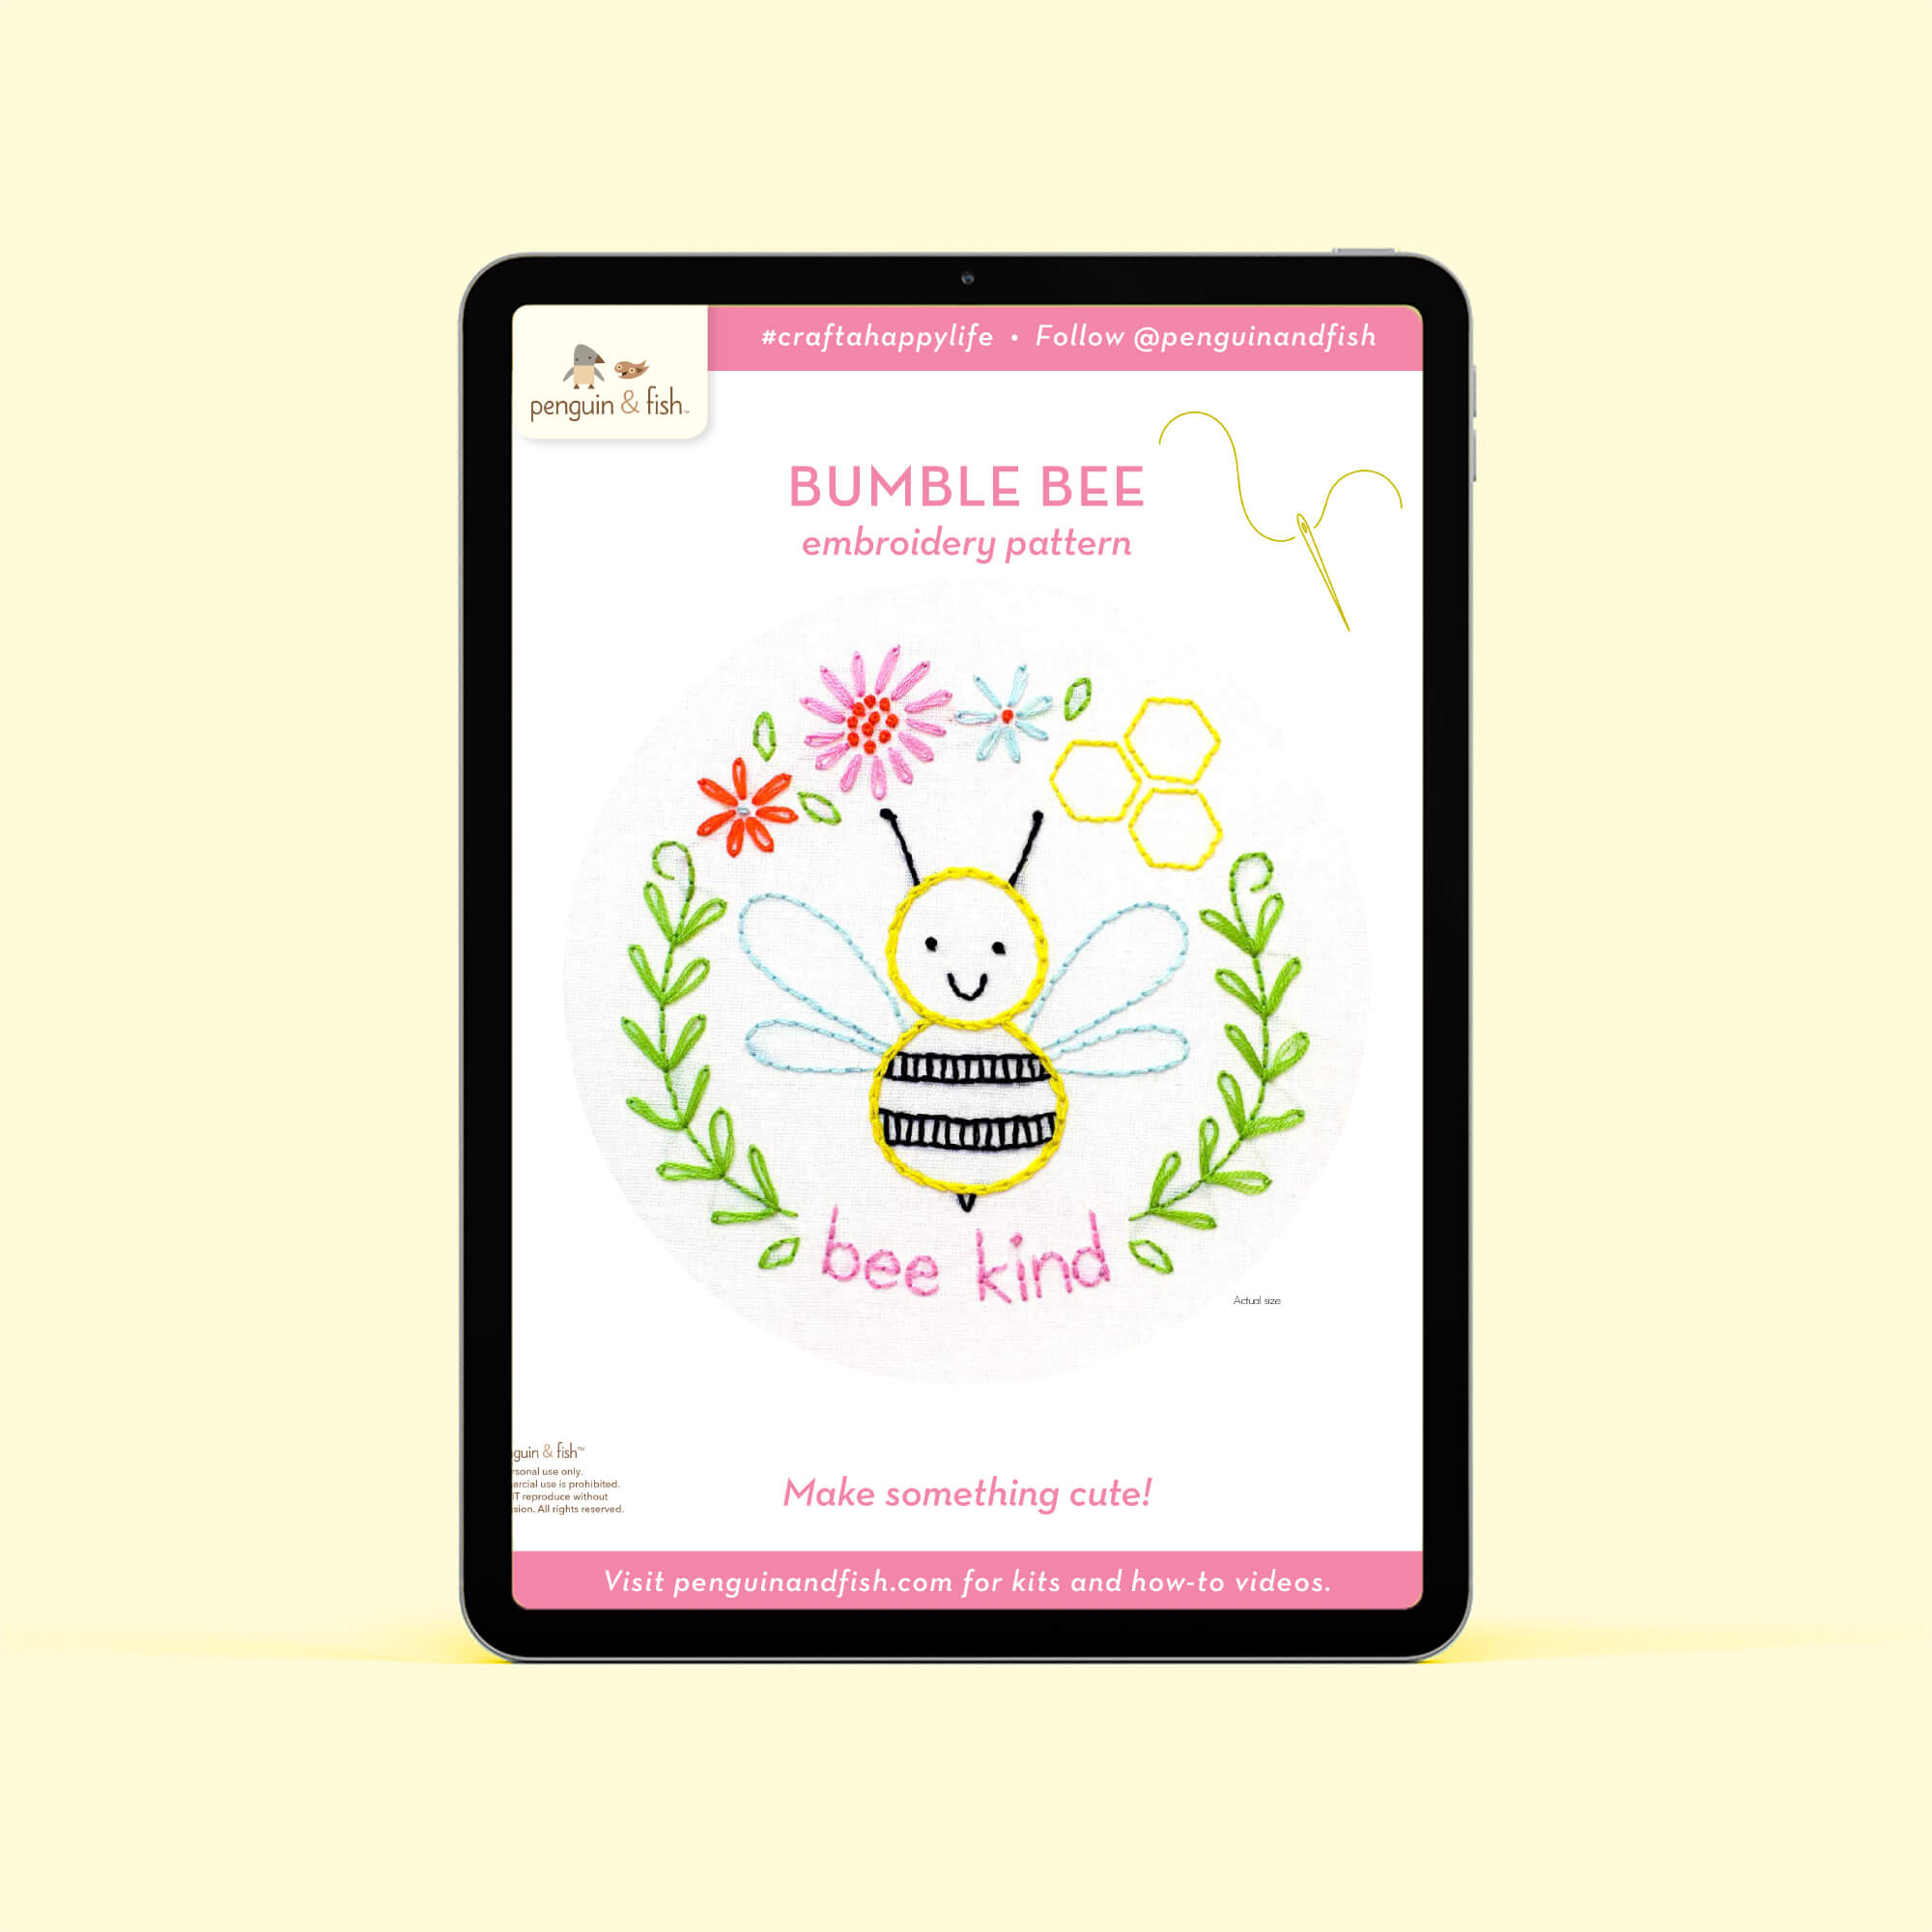 Bumblebee PDF embroidery pattern shown on a tablet